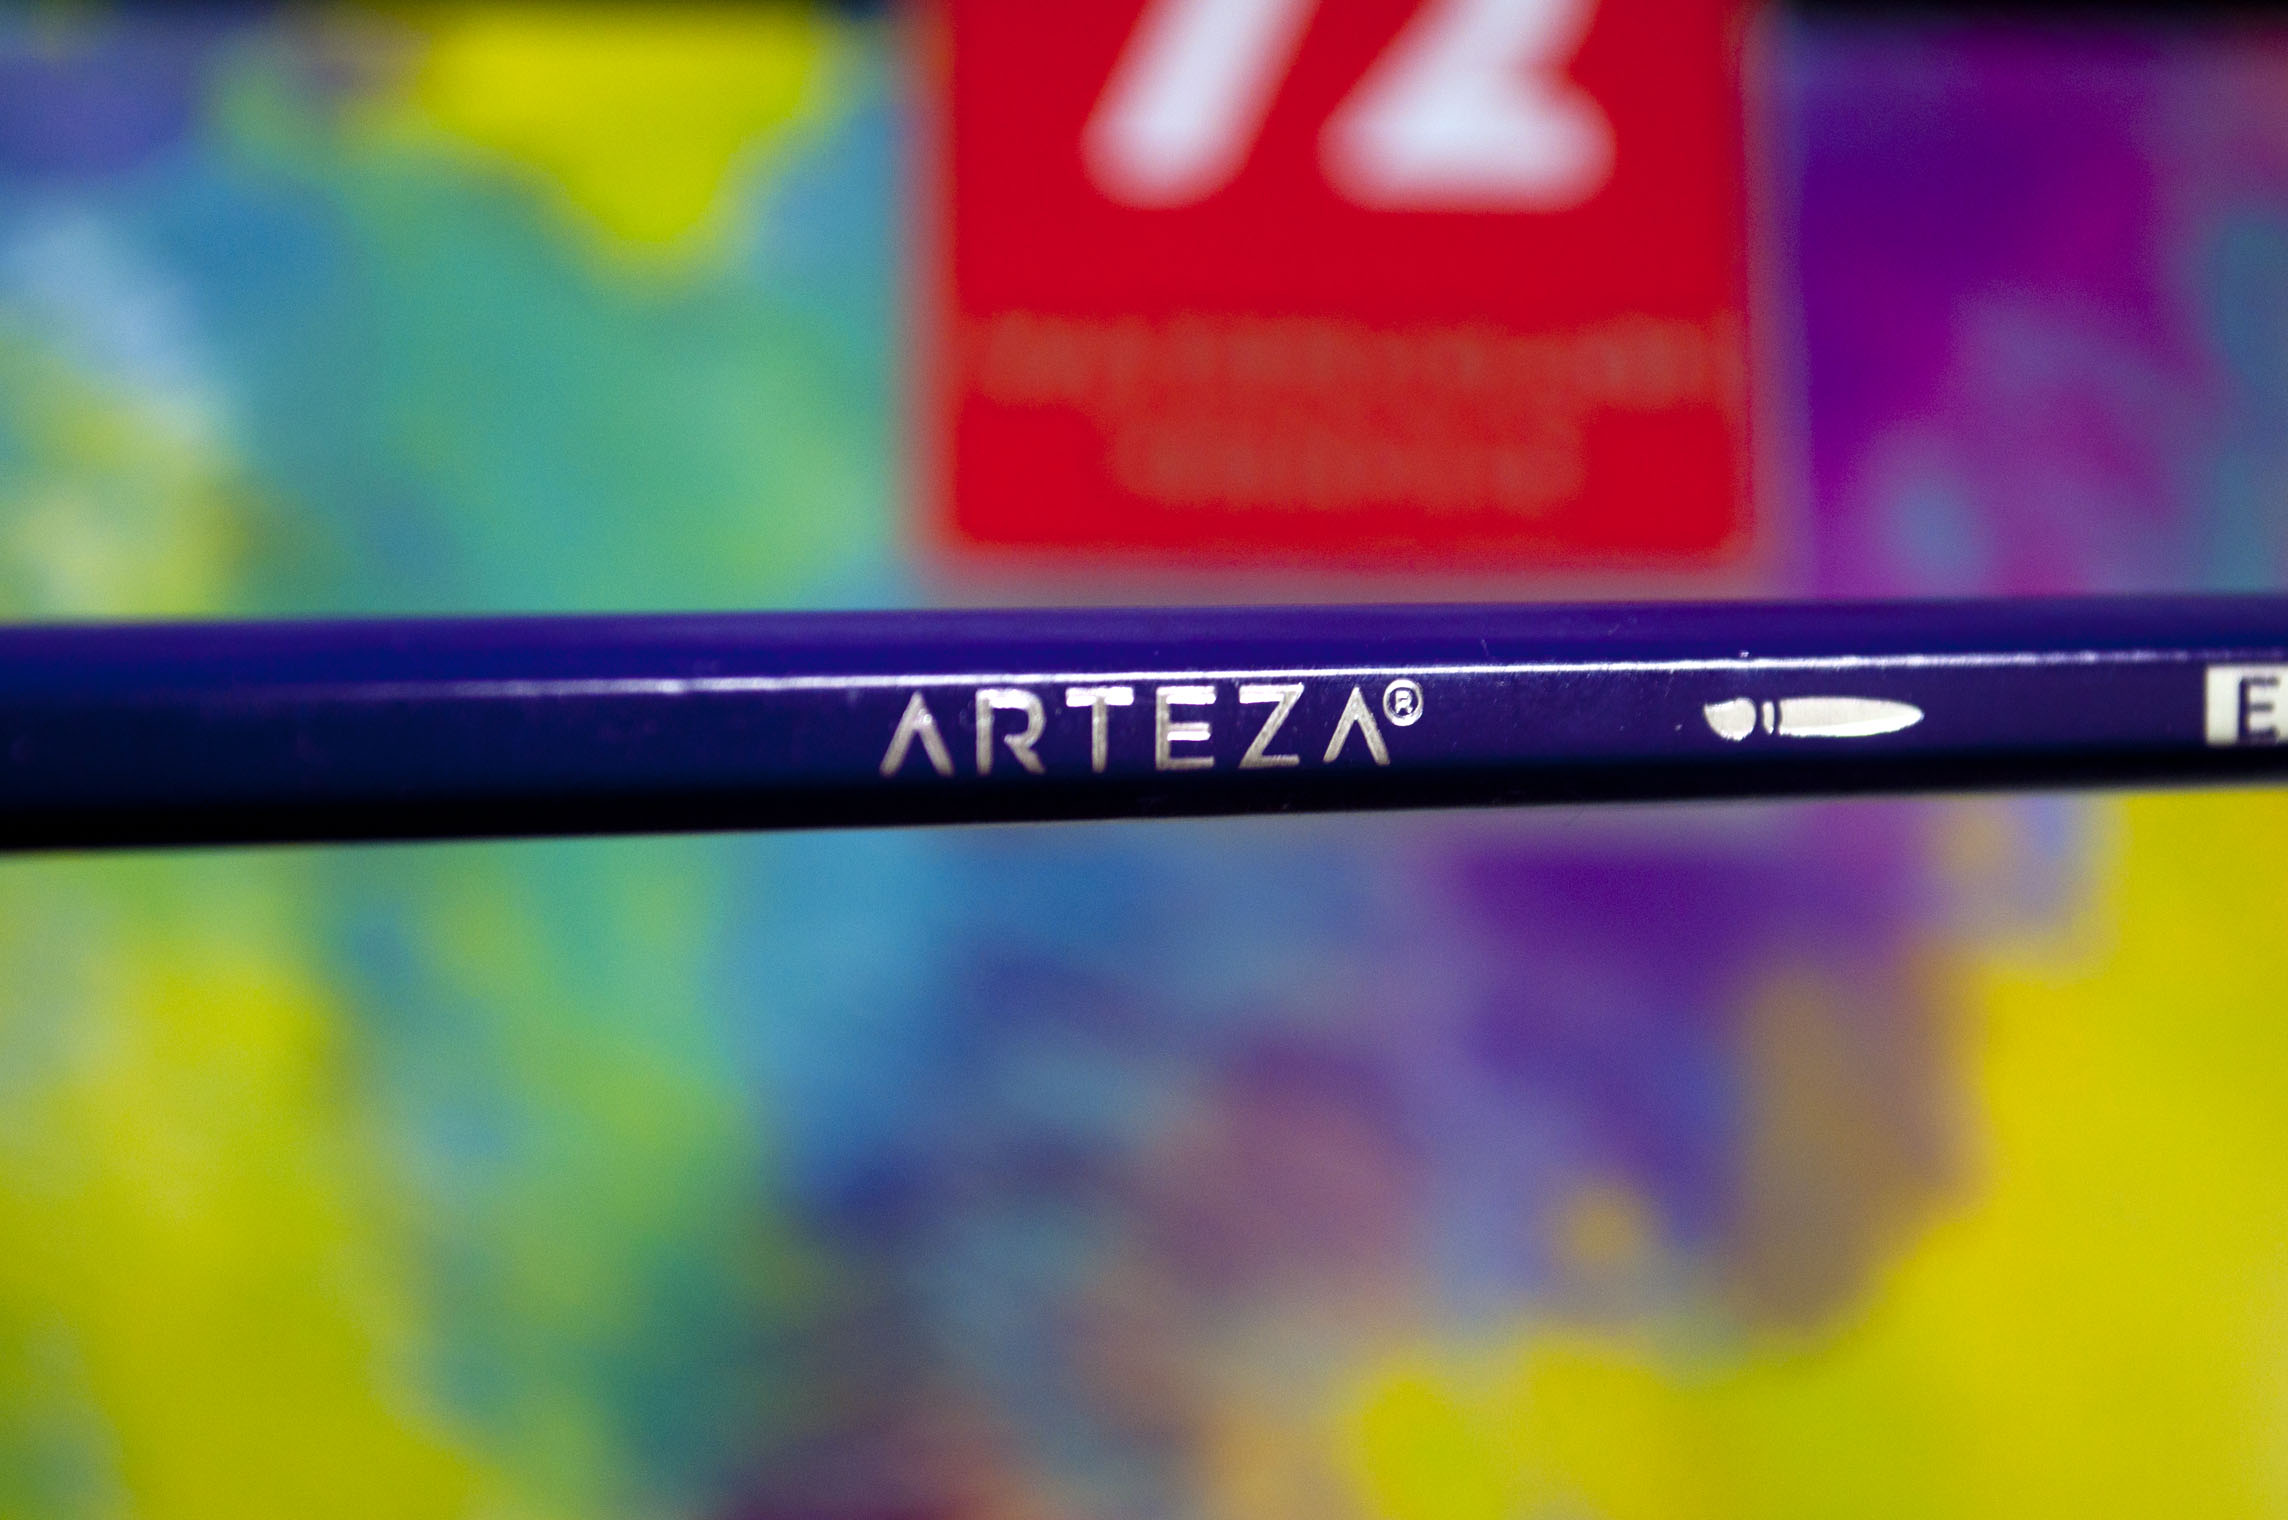 Watercolor and sparkle - Arteza review